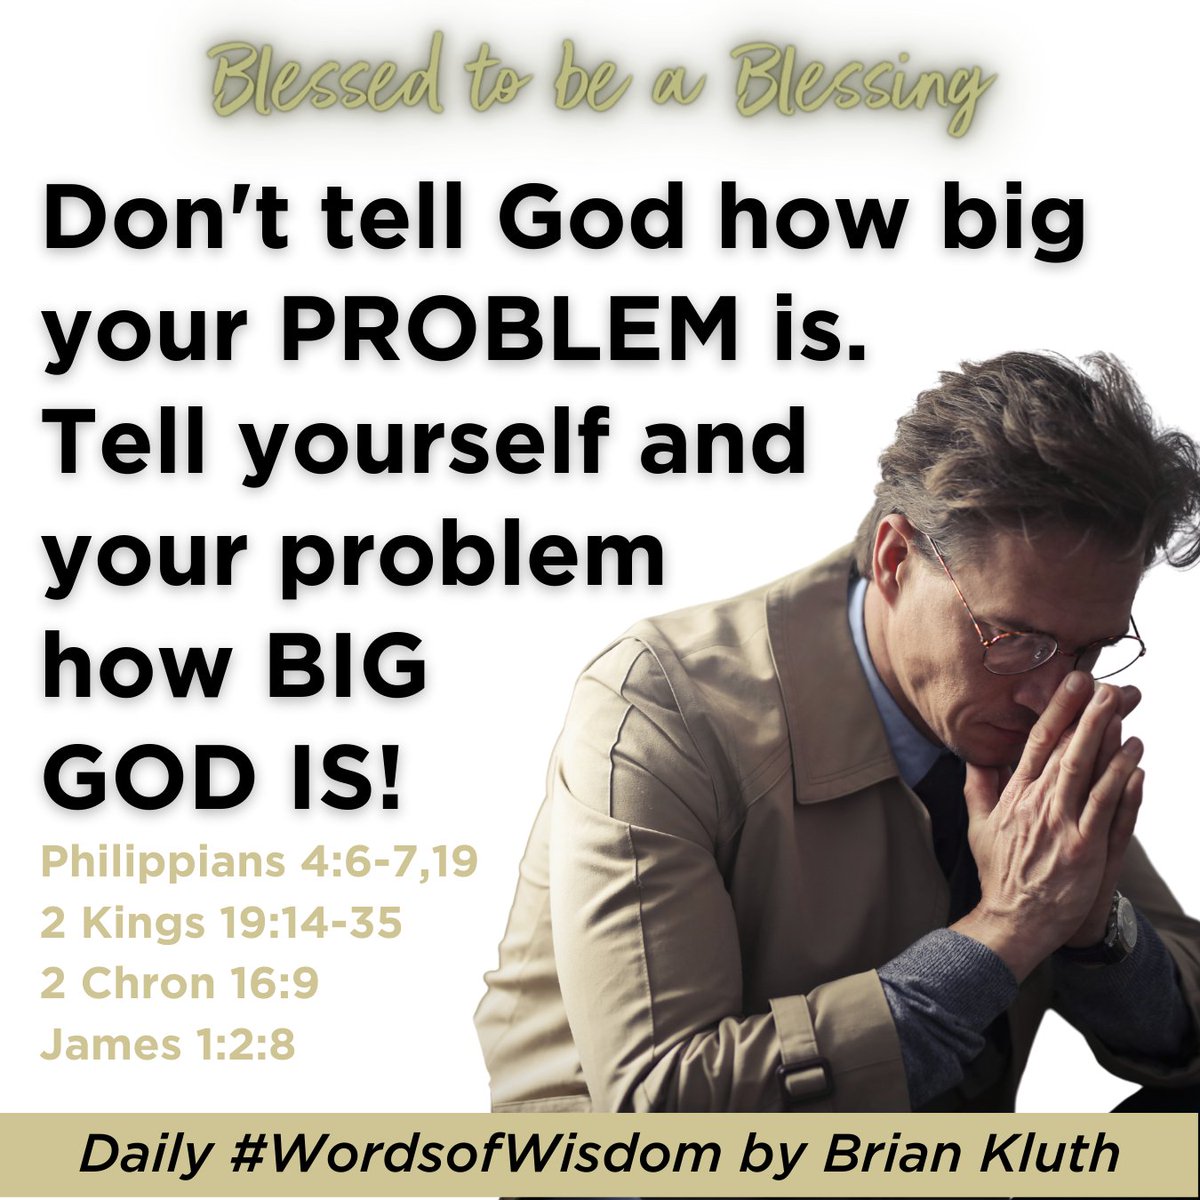 Day 18 - #CalendarQuotes #WordsofWisdom  #LiveaLifeofFAITH (Fantastic Adventures In Trusting Him) #DailyInspiration #Brianisms #OvercomingProblems #PrayerBreakthroughs God is #Bigger, #Greater, #Higher & #MorePowerful than any #problems you are facing. He is the #MostHighGod.